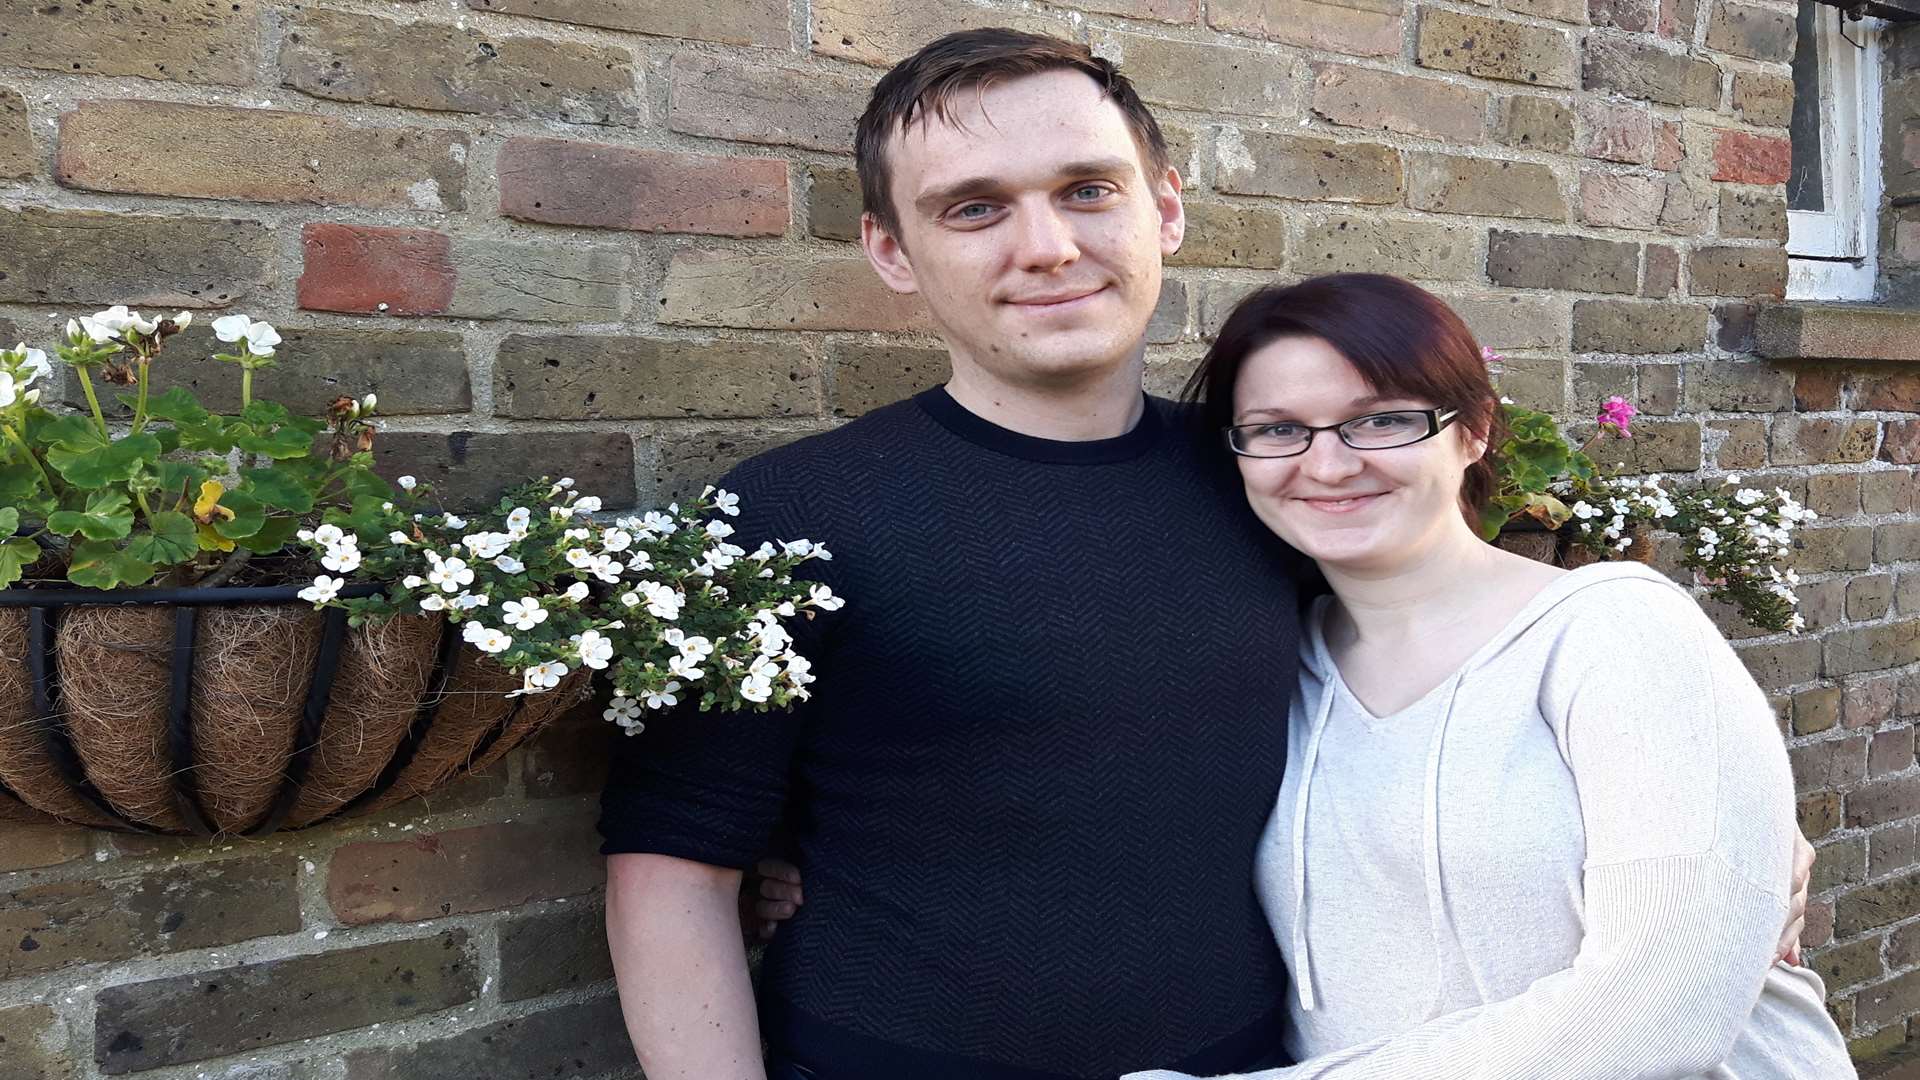 Helen Clarkson and fiance Mike Langridge will be cycling the world together after meeting on dating app Tinder